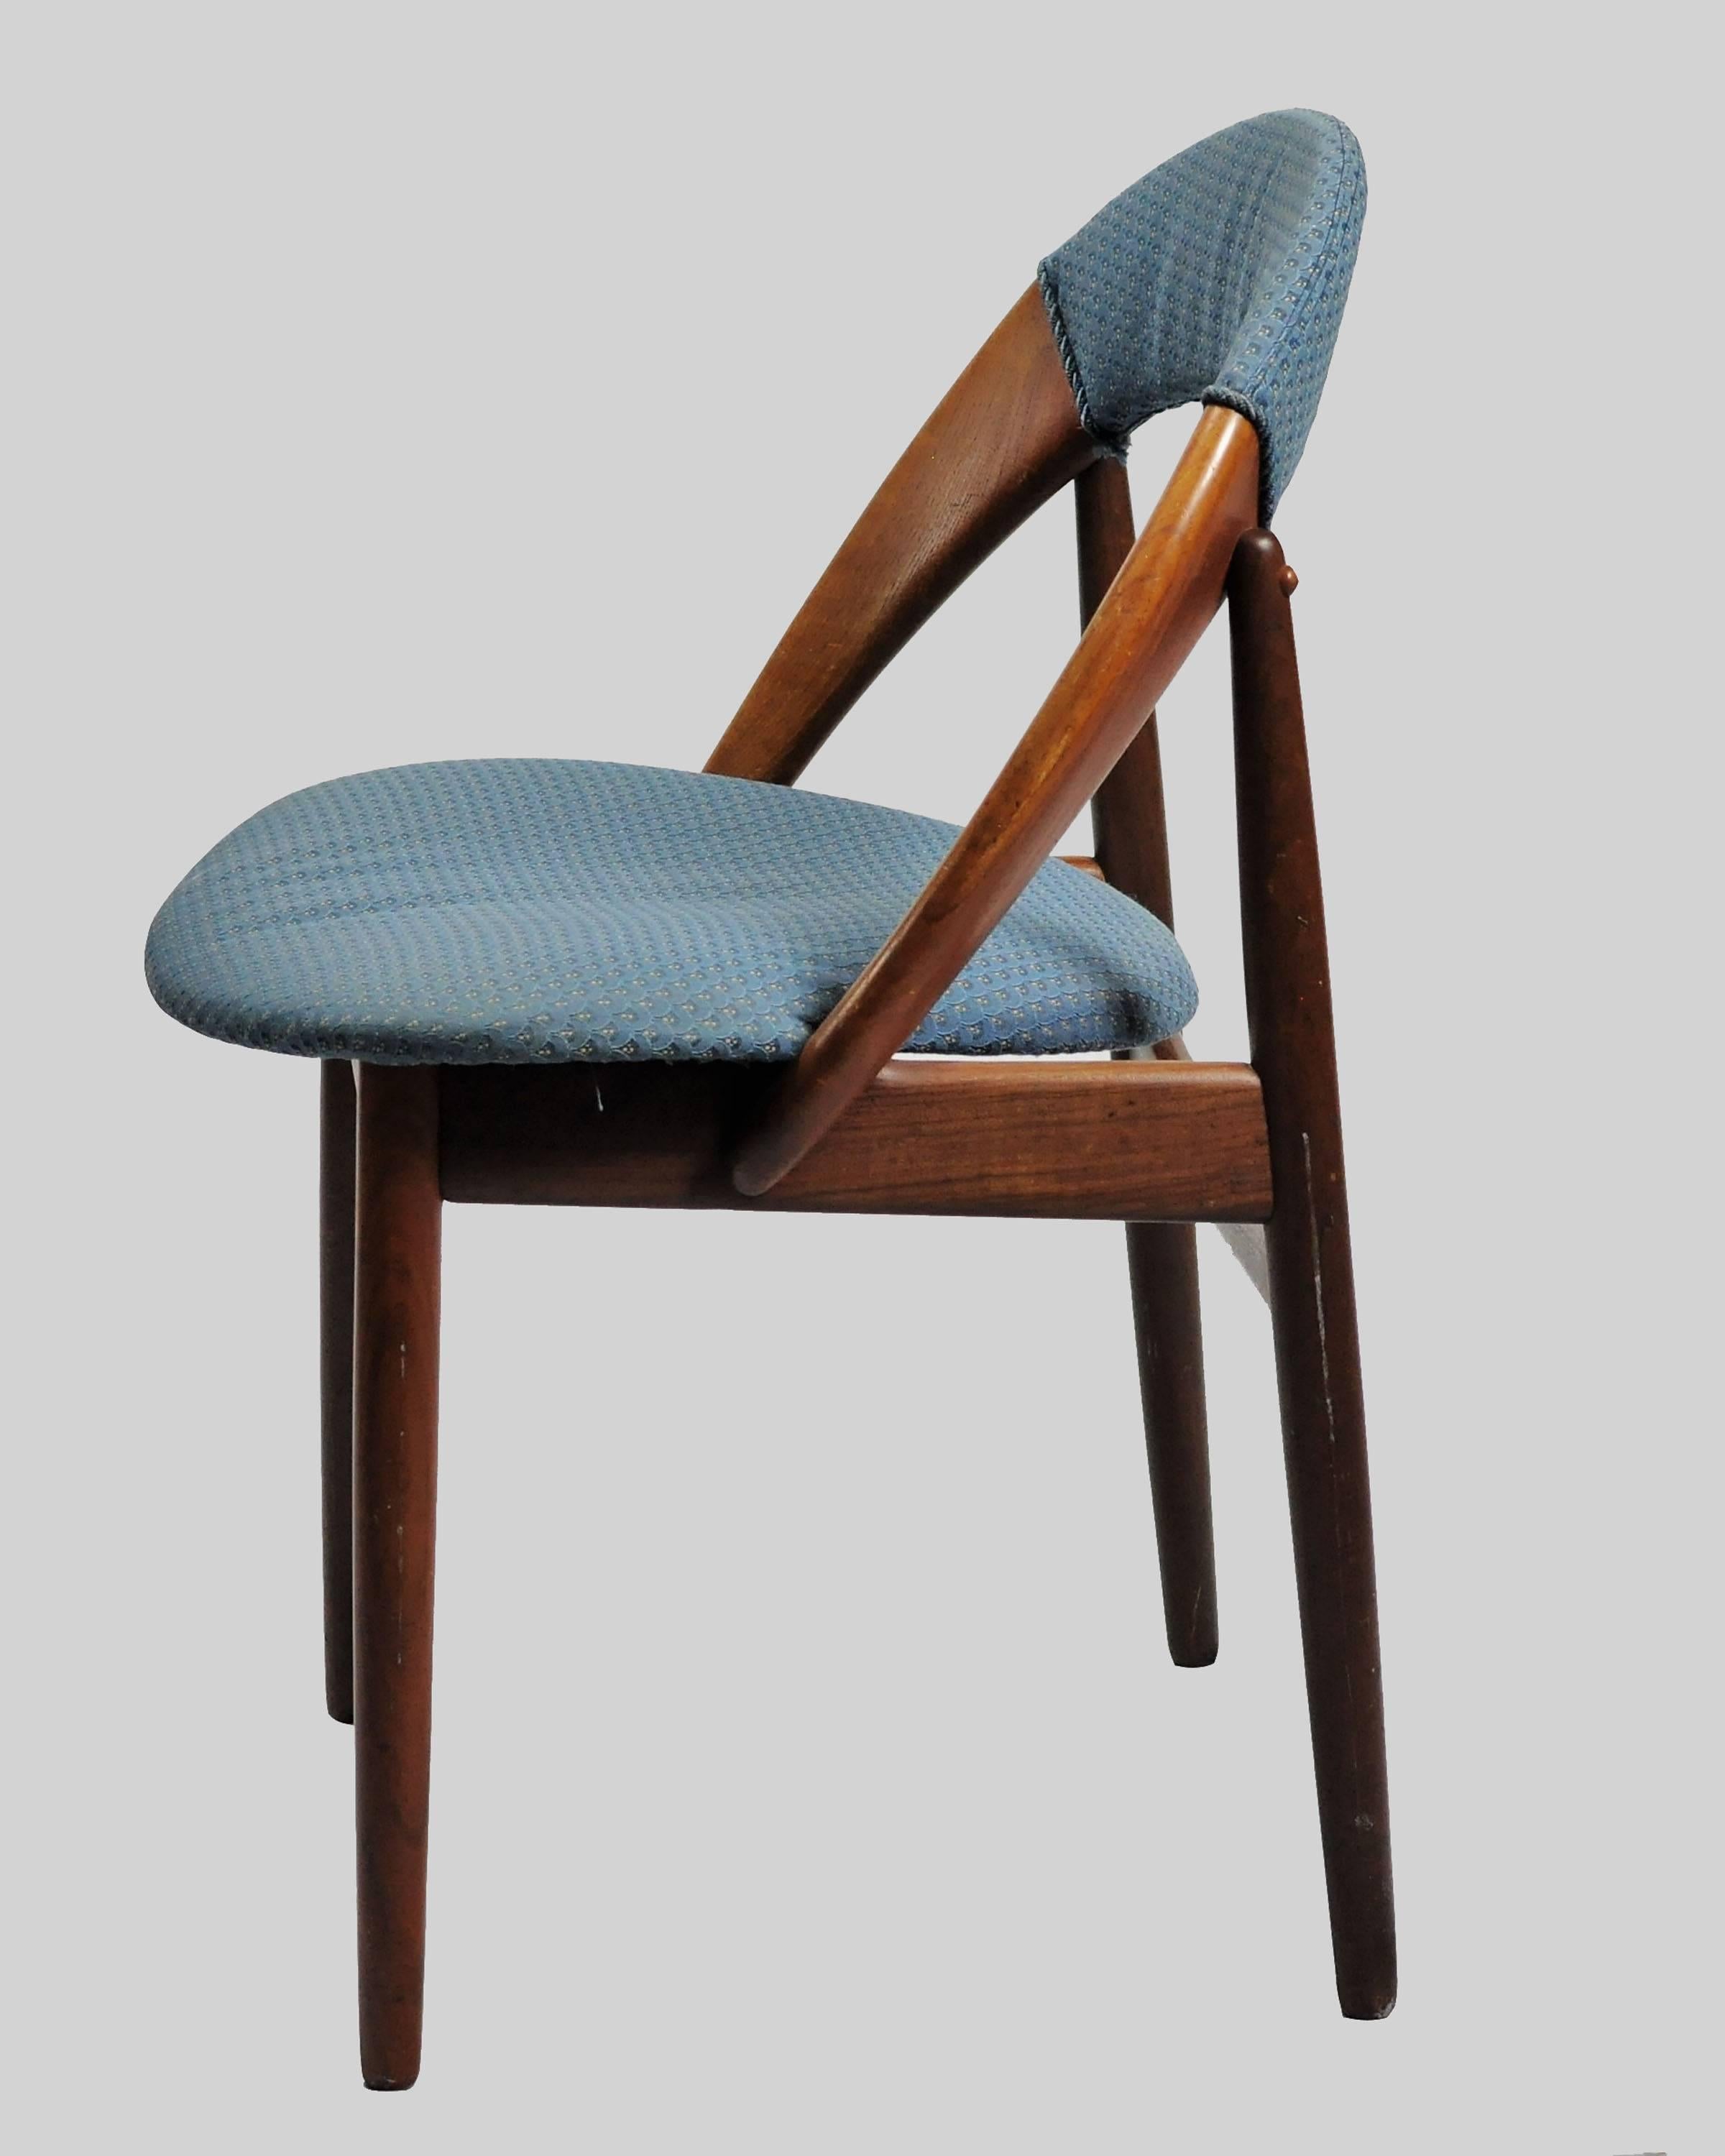 Side chair designed by Arne Hovmand-Olsen in the 1960s.

Frames of the chairs are refinished and seats and backrest will be reupholstered in fabric and color of your choice from KVADRAT.